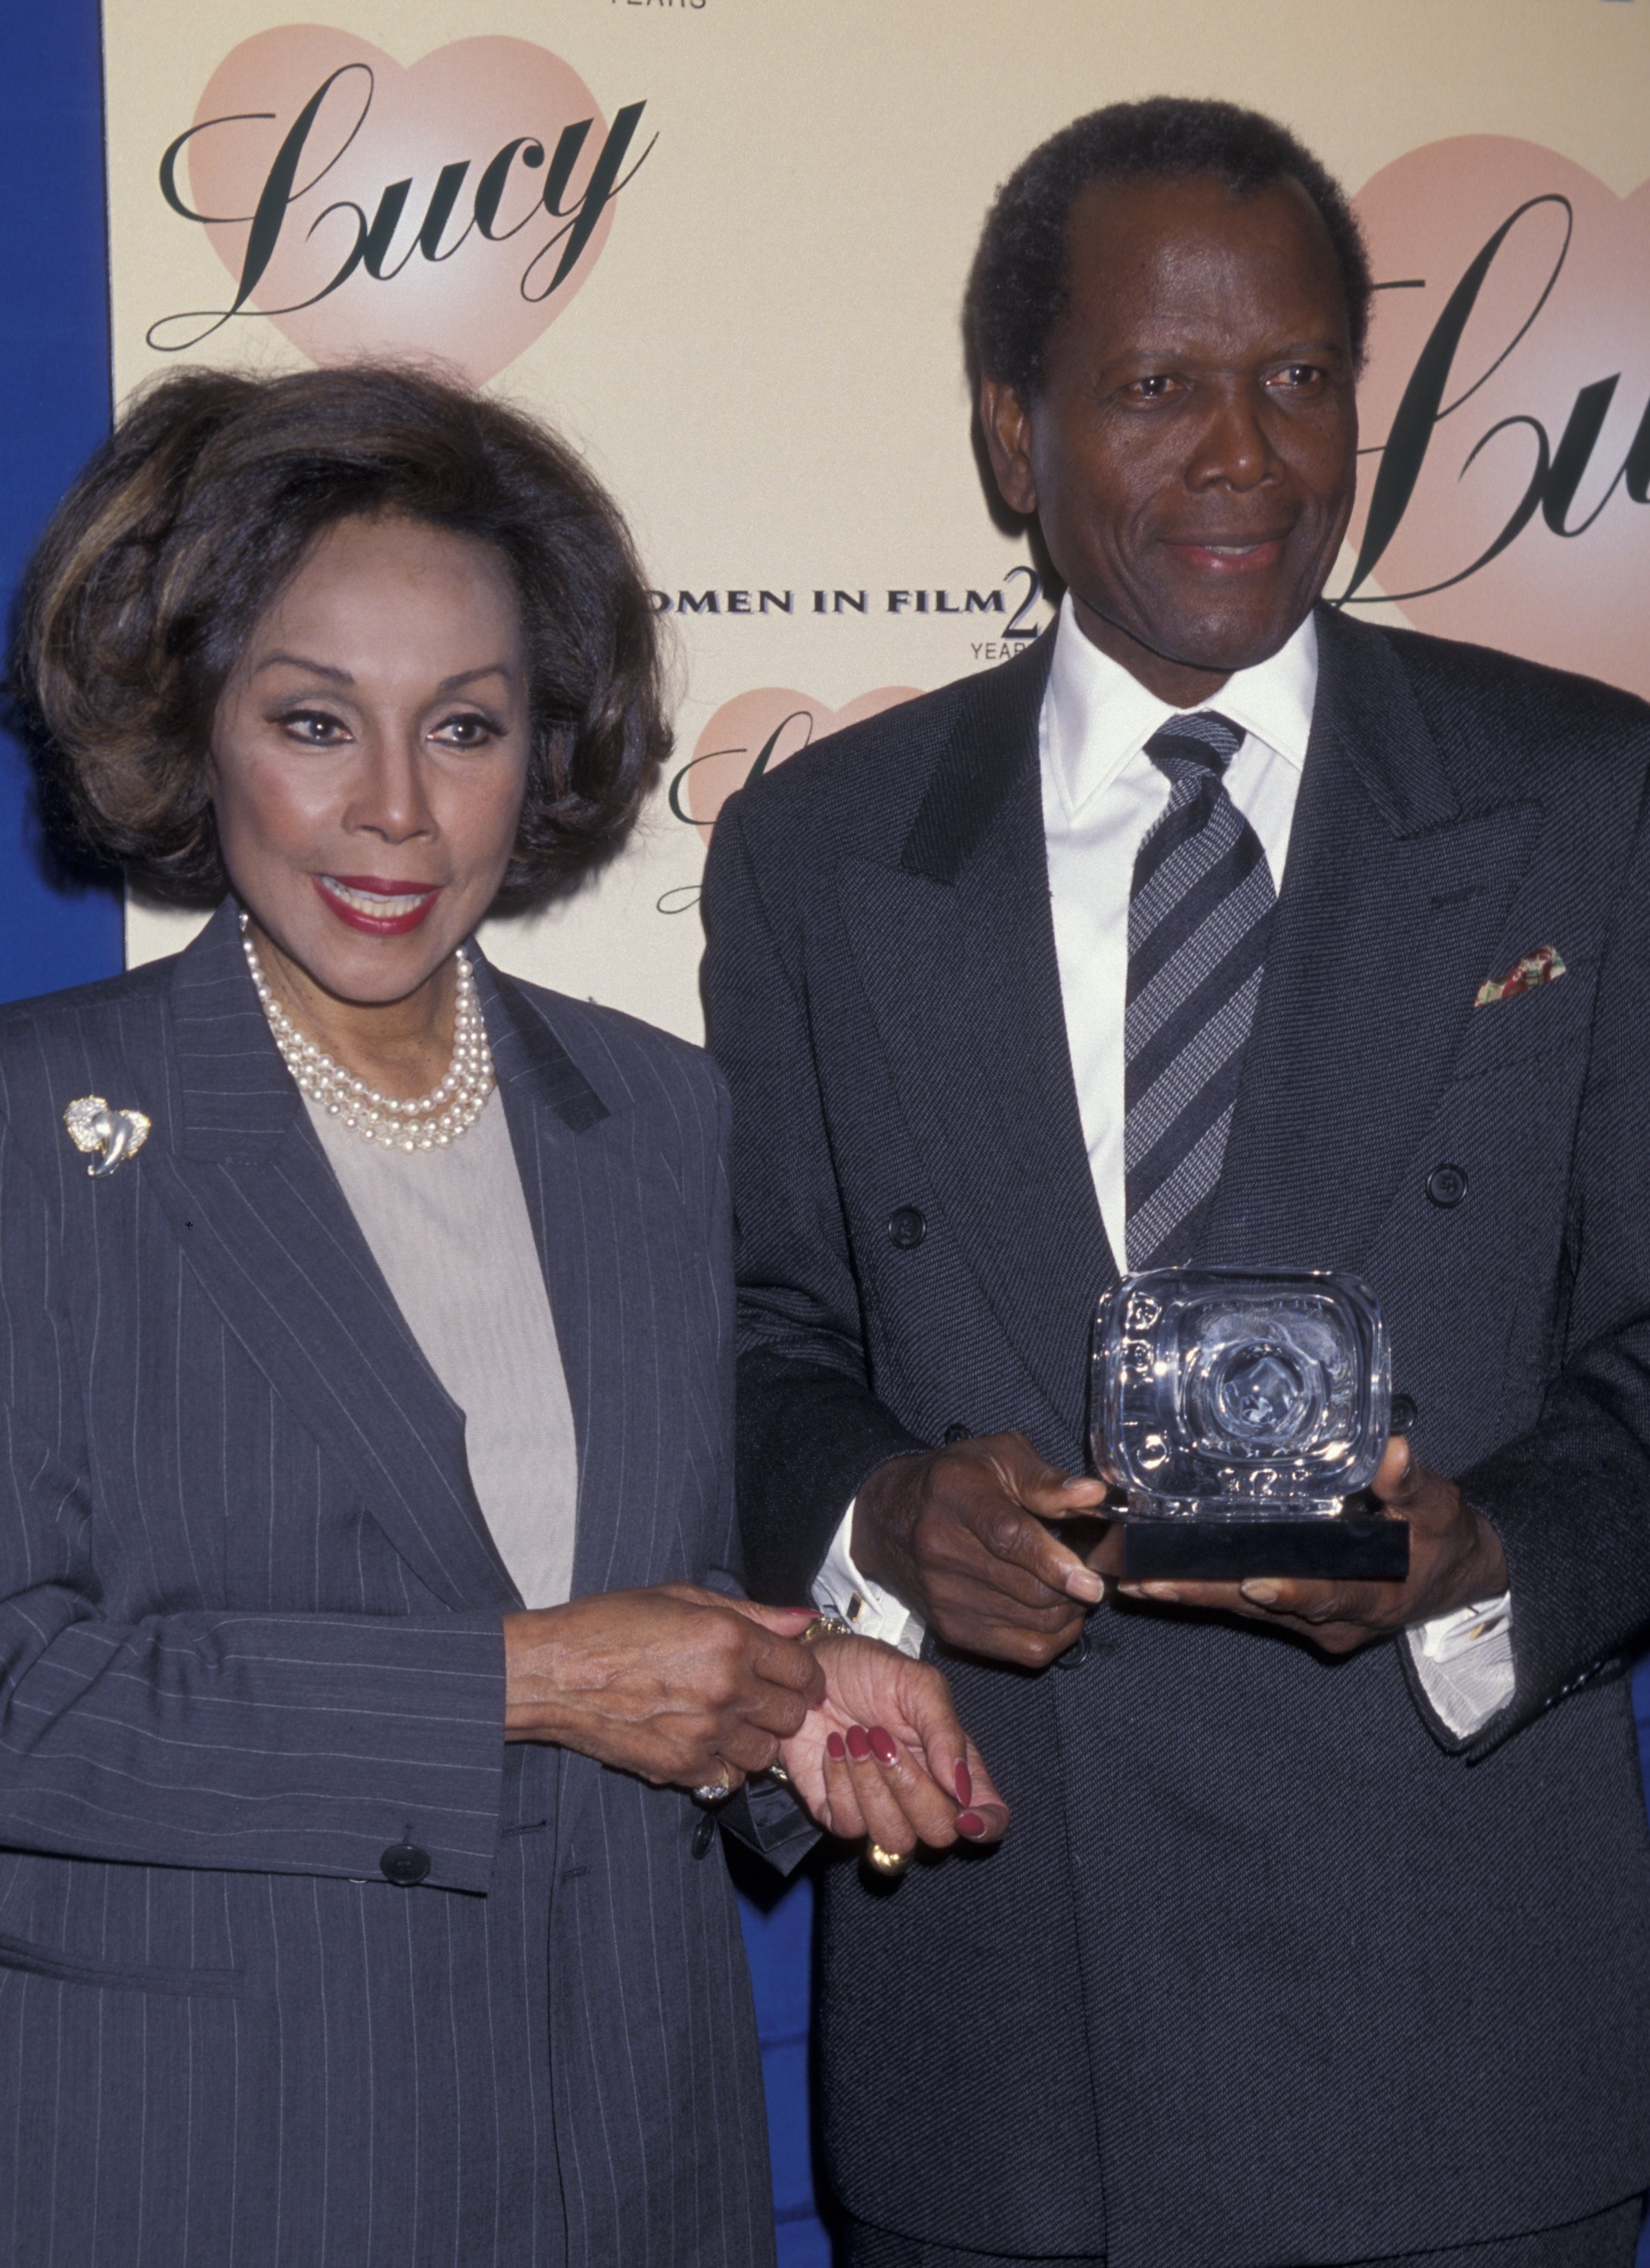  Diahann Carroll and Sidney Poitier attend the Fifth Annual Women in Film Lucy Awards at the Beverly Wilshire Hotel in Beverly Hills, California, 1998. | Photo: Getty Images